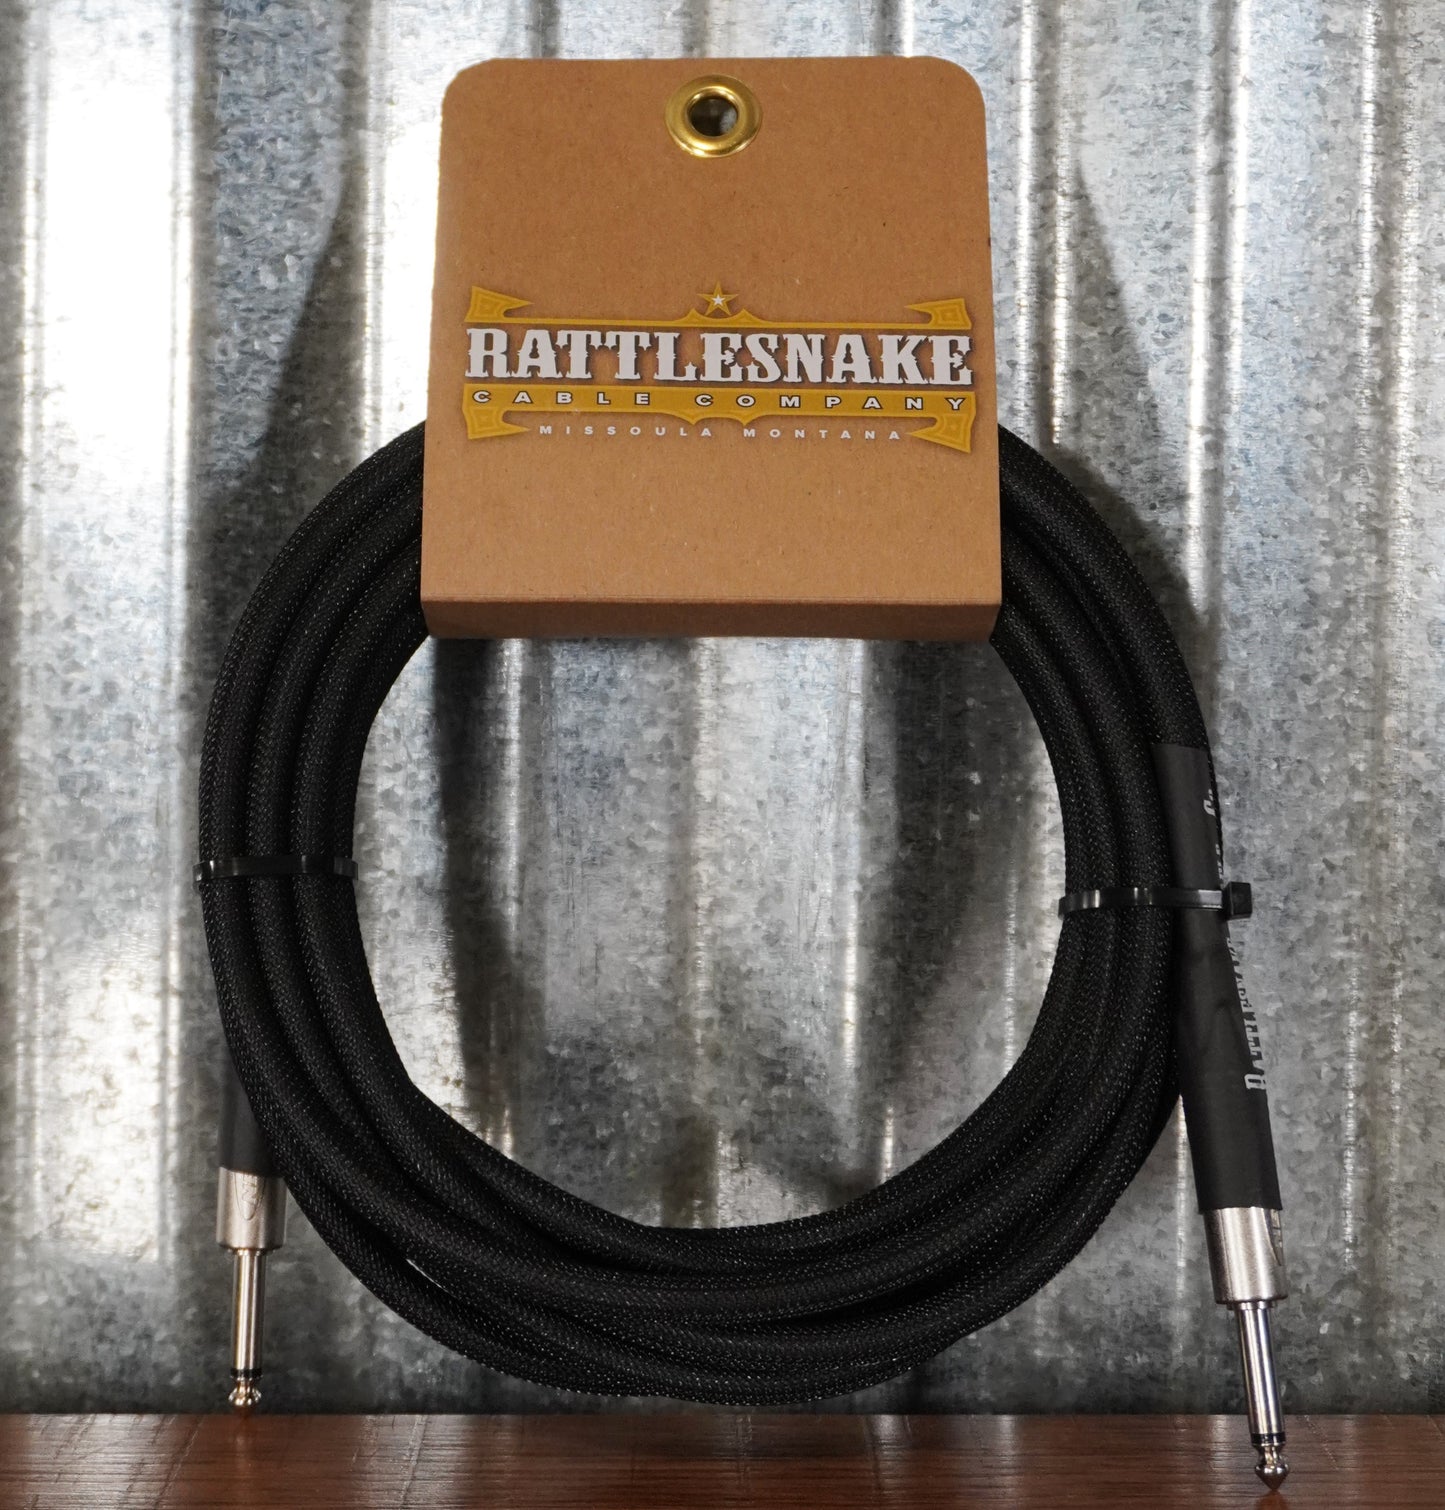 Rattlesnake Cable Co 20-ST-BK-S-NN 20' Standard Cable Black Straight Plugs